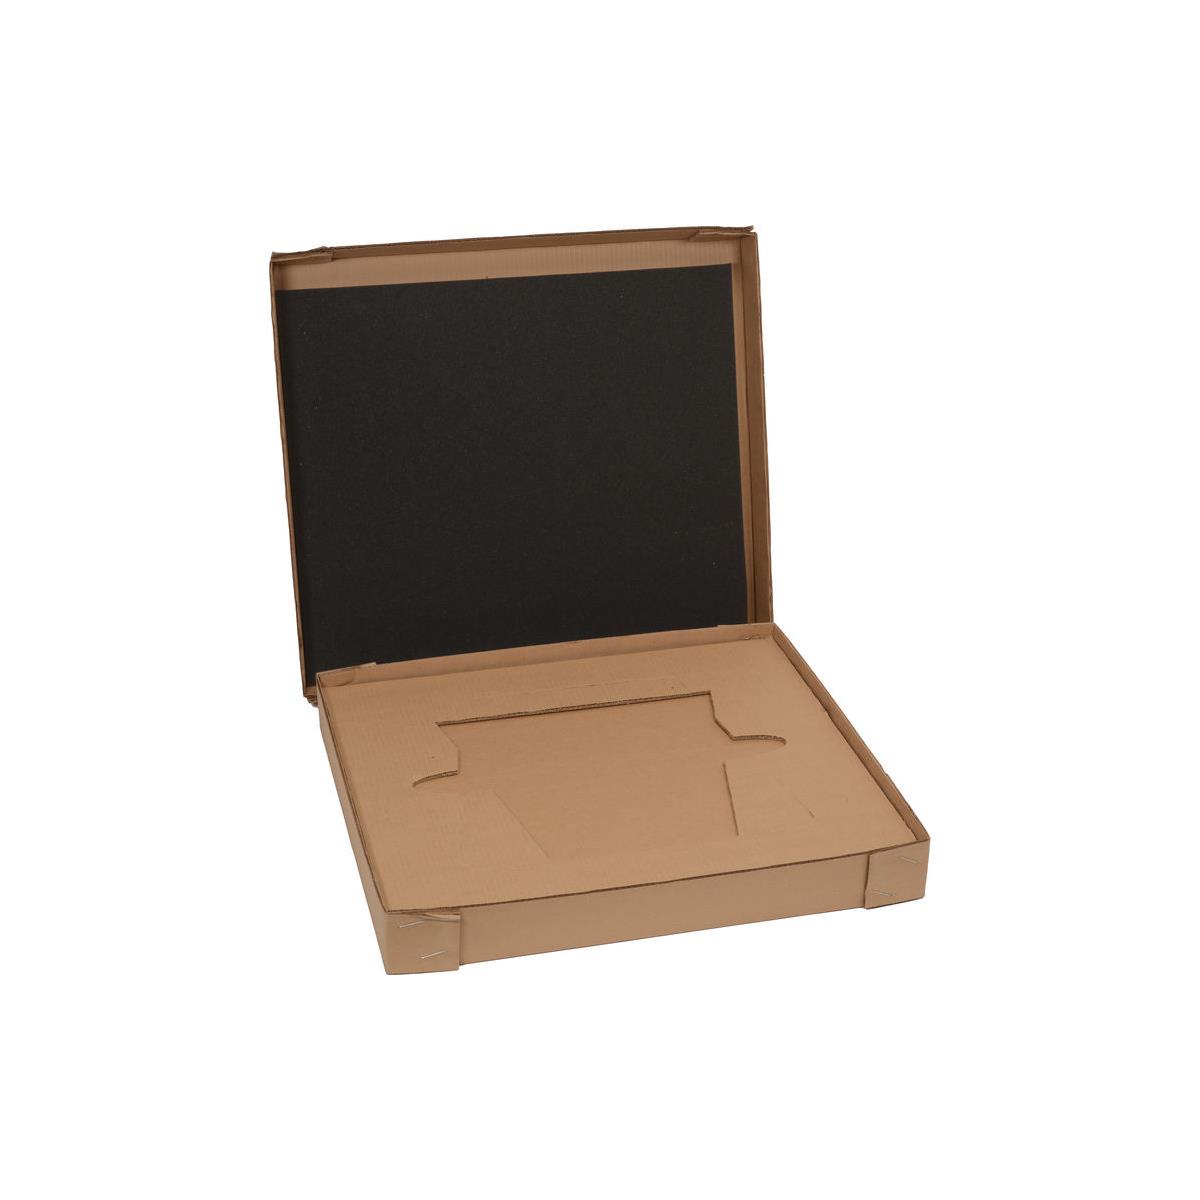 Image of Autoscript Cardboard Box for RG-CBF/RGFH-8/RGFH-S/RGMH-S/RGMH-W Prompter Glasses